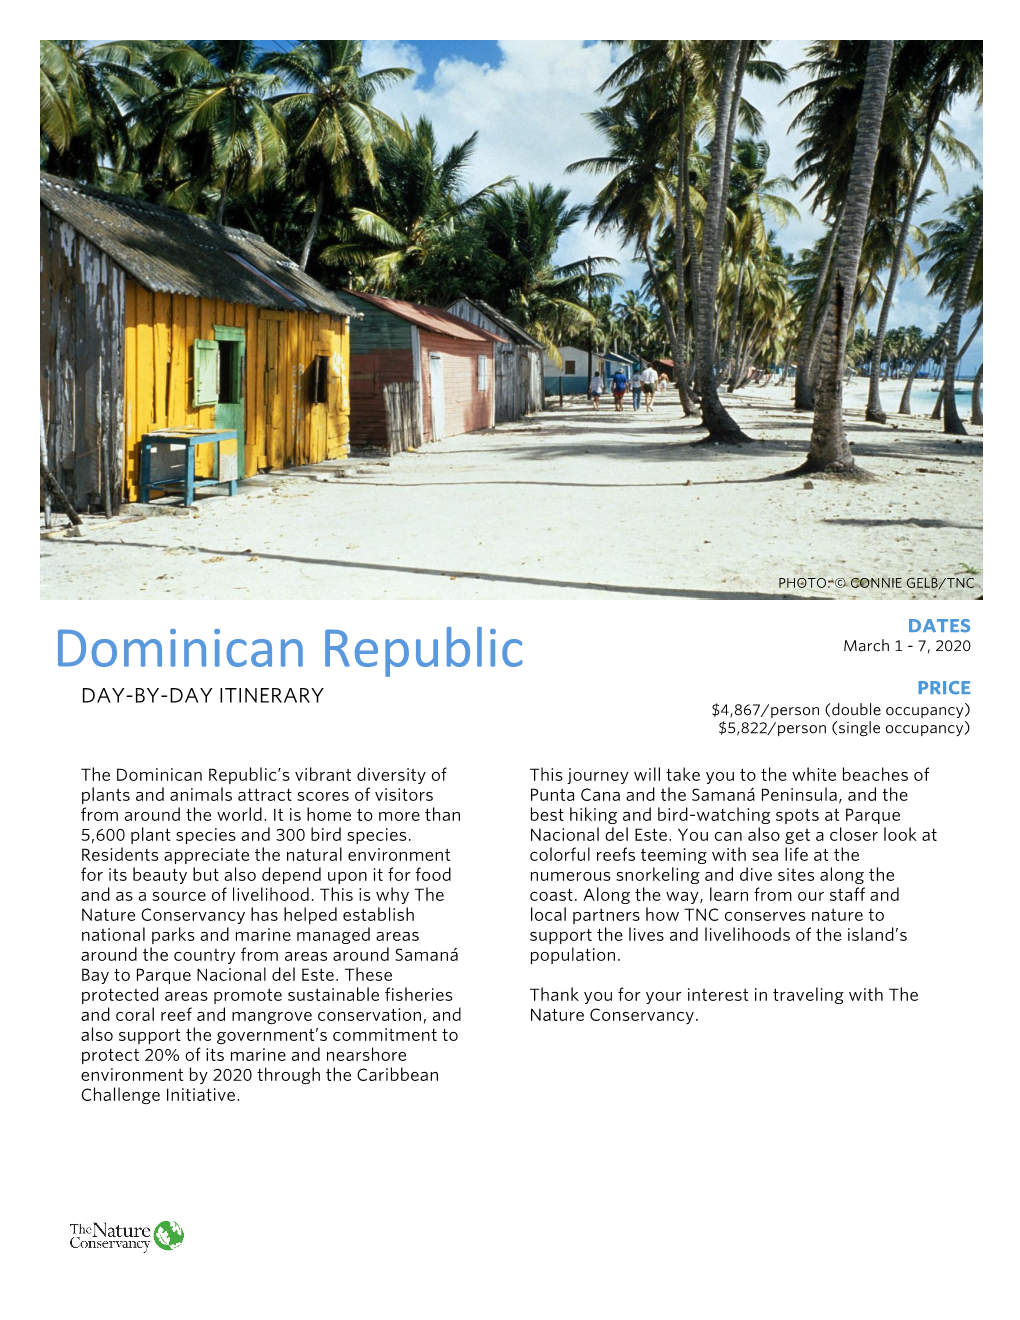 Dominican Republic DAY -BY-DAY ITINERARY PRICE $4,867/Person (Double Occupancy) $5,822/Person (Single Occupancy)